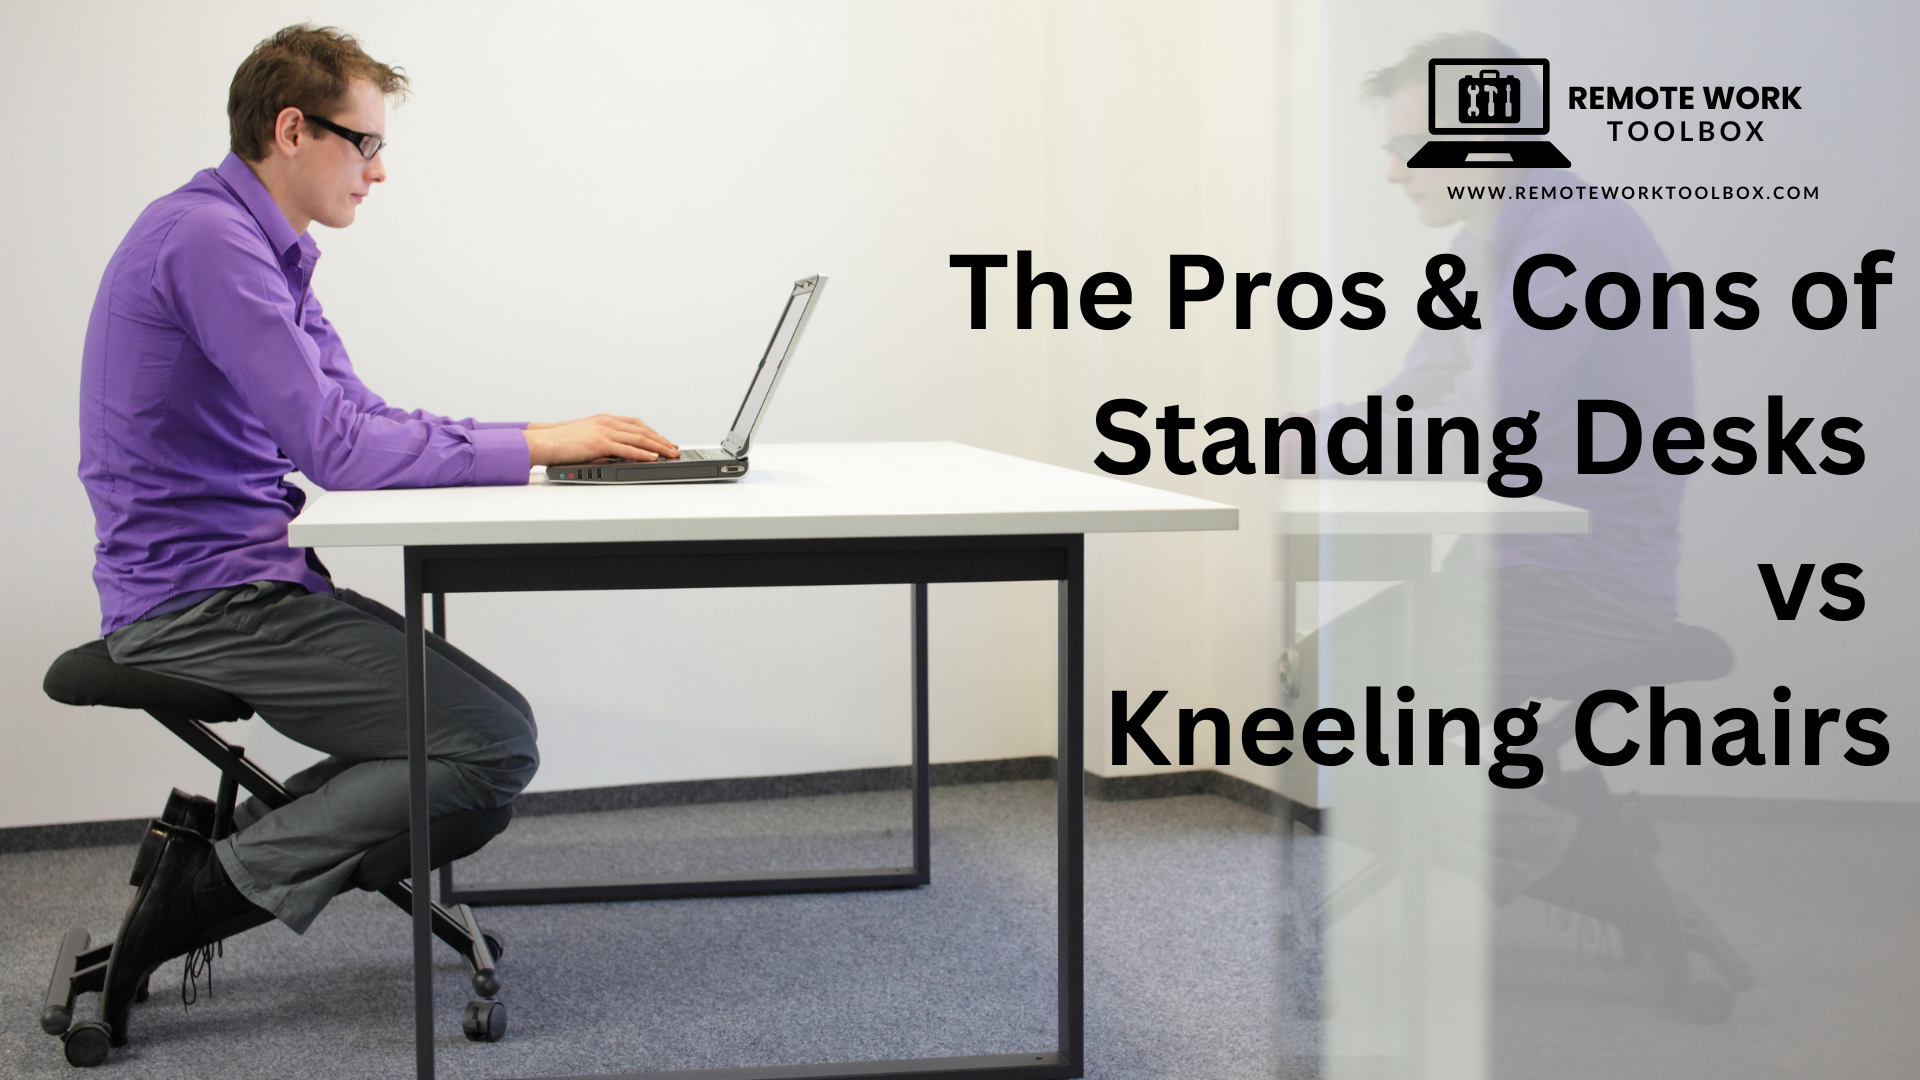 The Pros & Cons of Standing Desks vs Kneeling Chairs